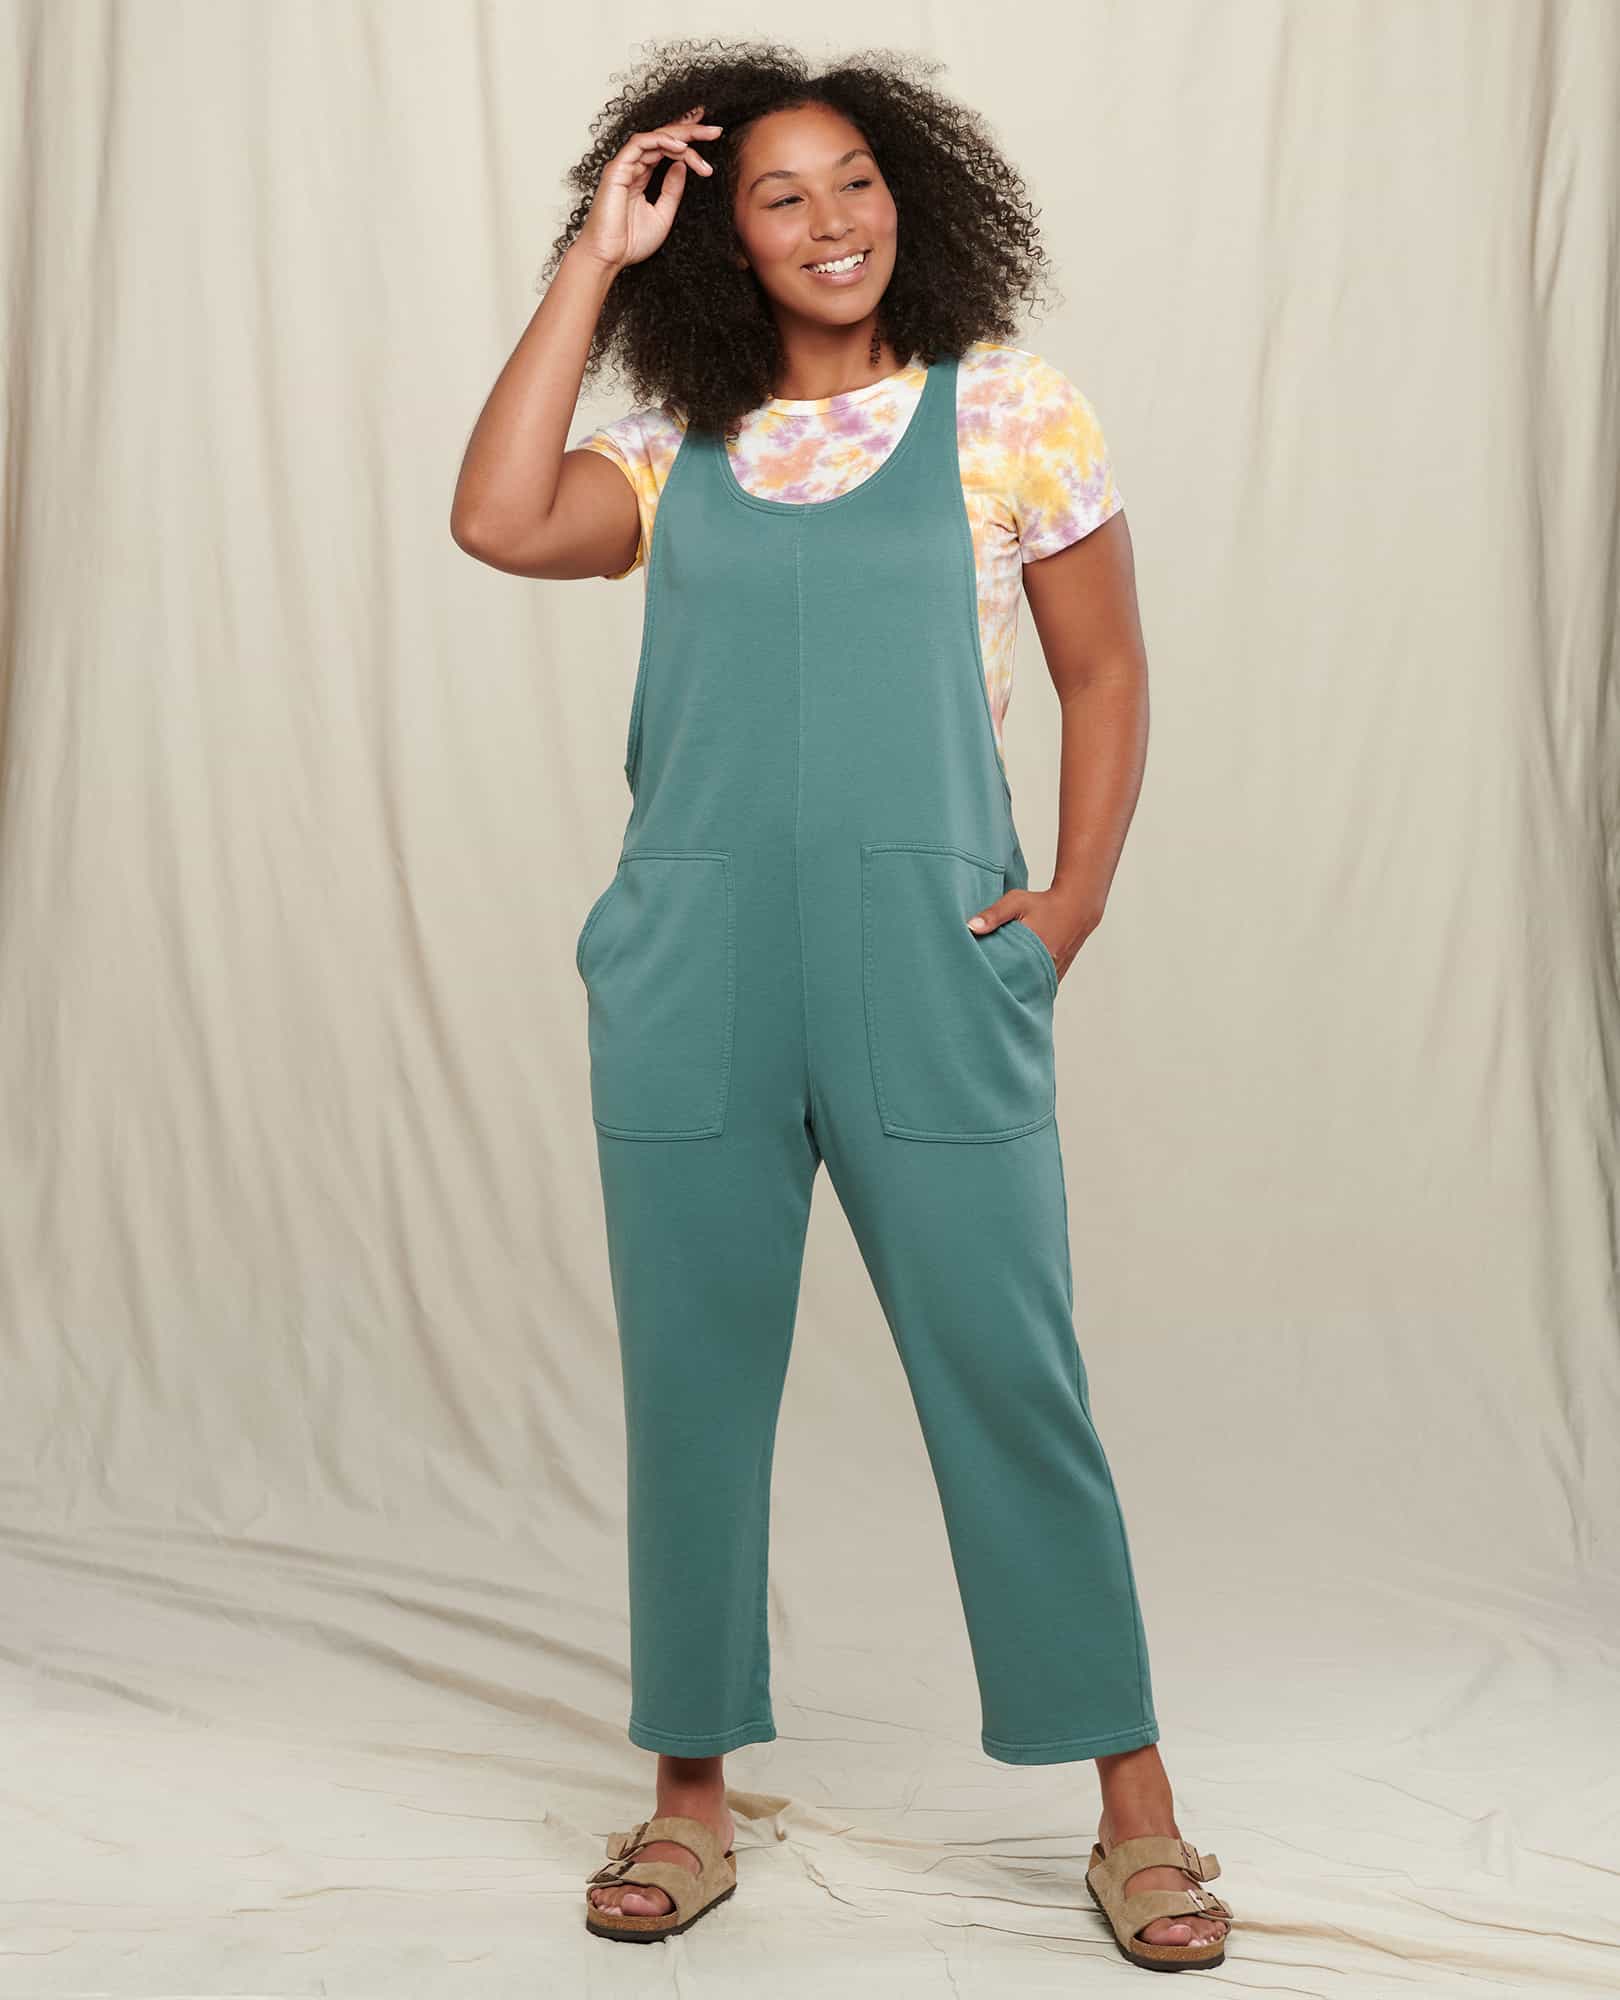 Stylish and Comfortable Plus Size Overalls Outfit